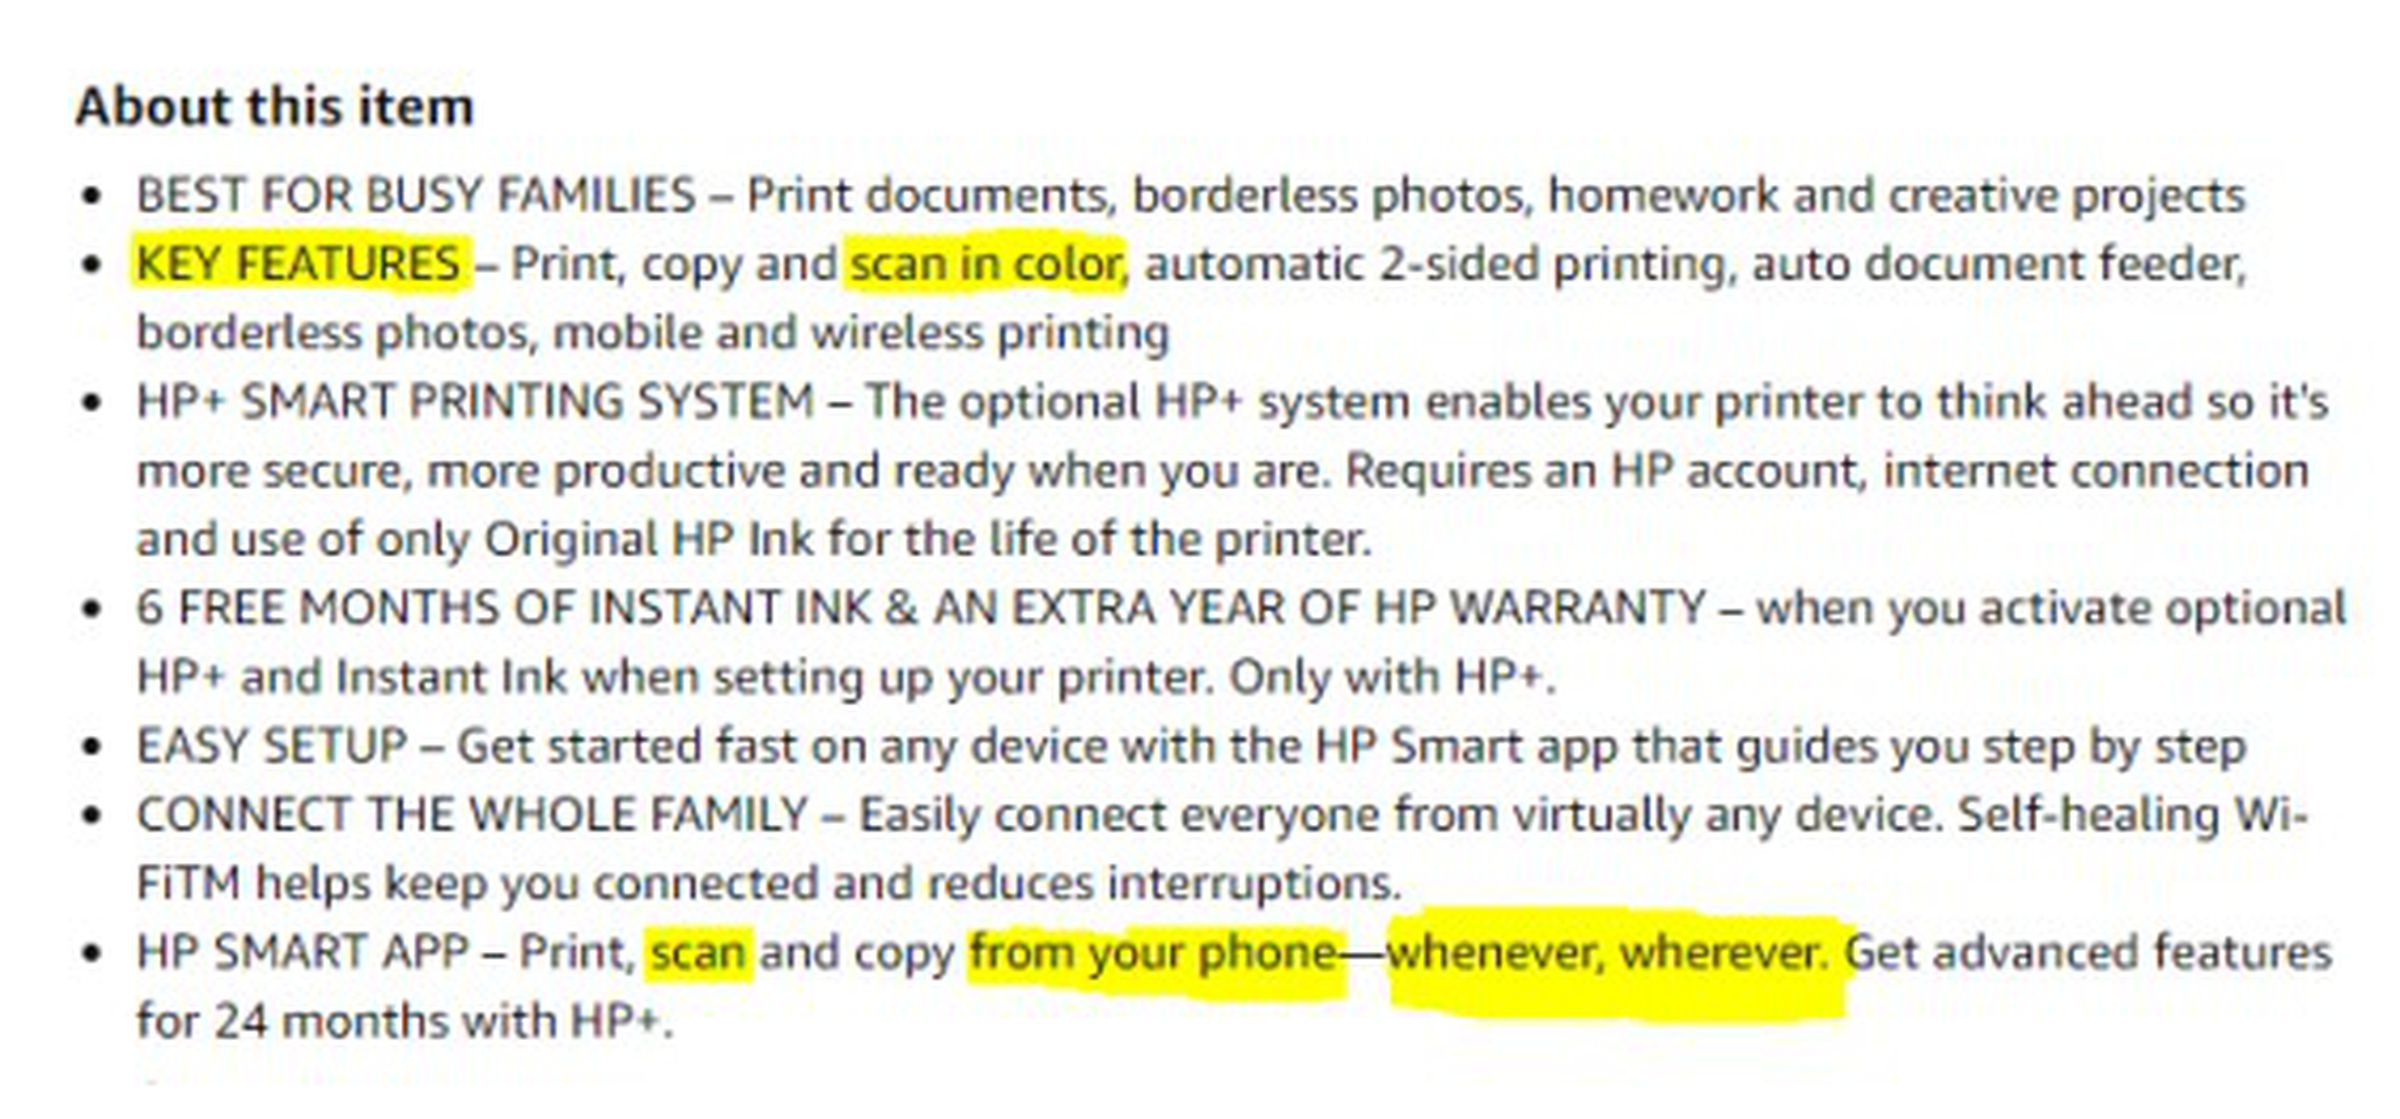 “Print, scan and copy from your phone—whenever, wherever.”